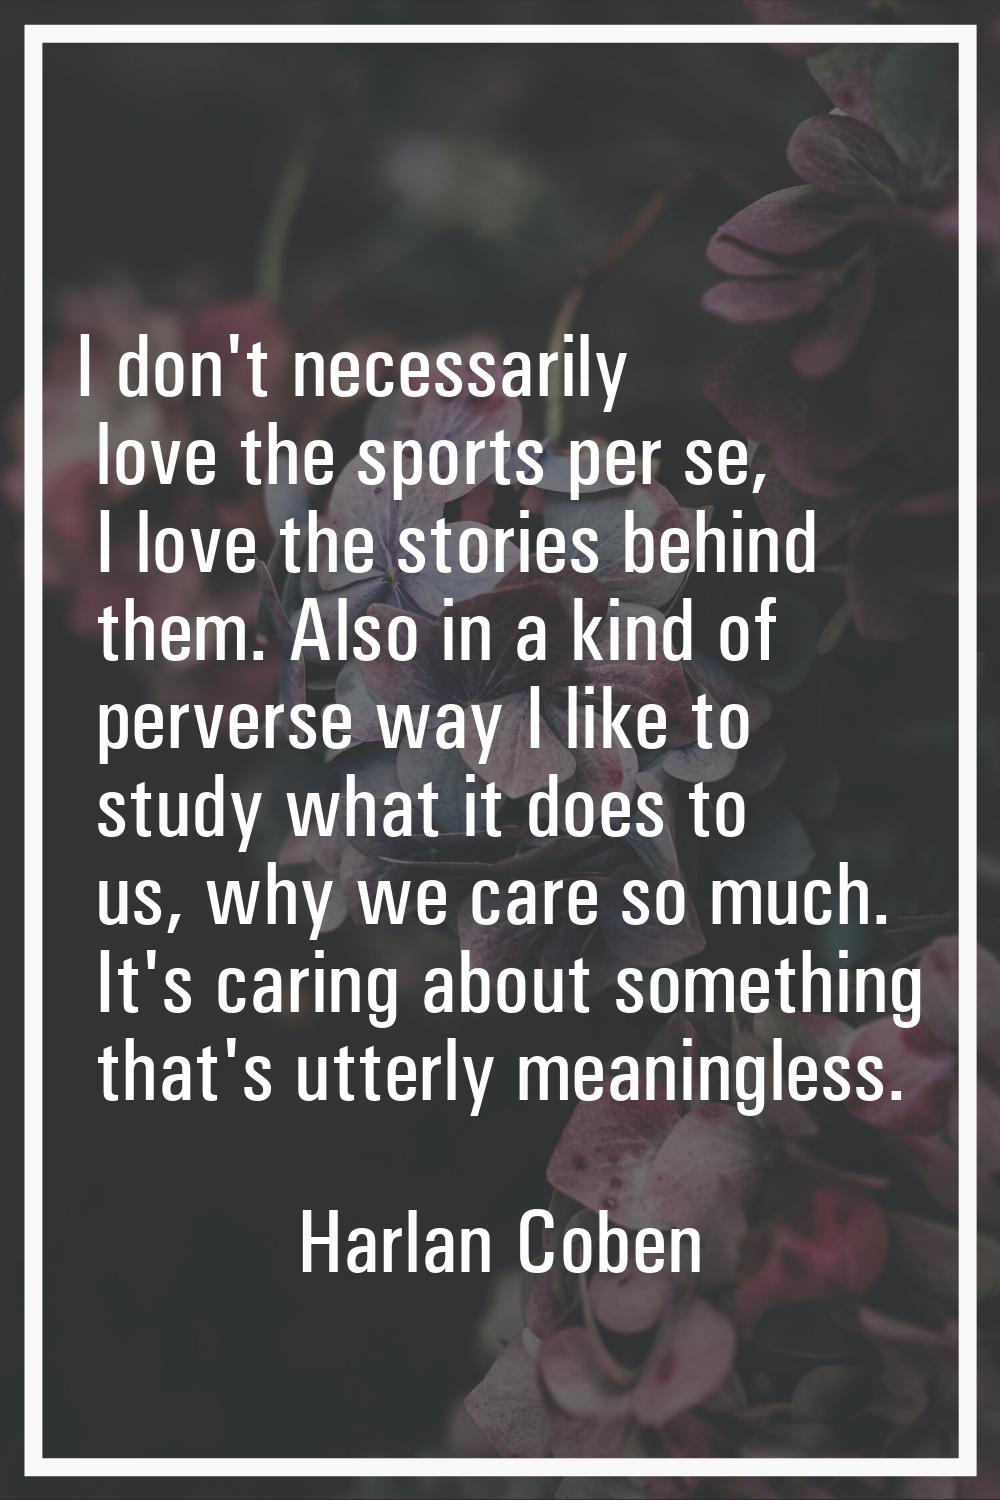 I don't necessarily love the sports per se, I love the stories behind them. Also in a kind of perve